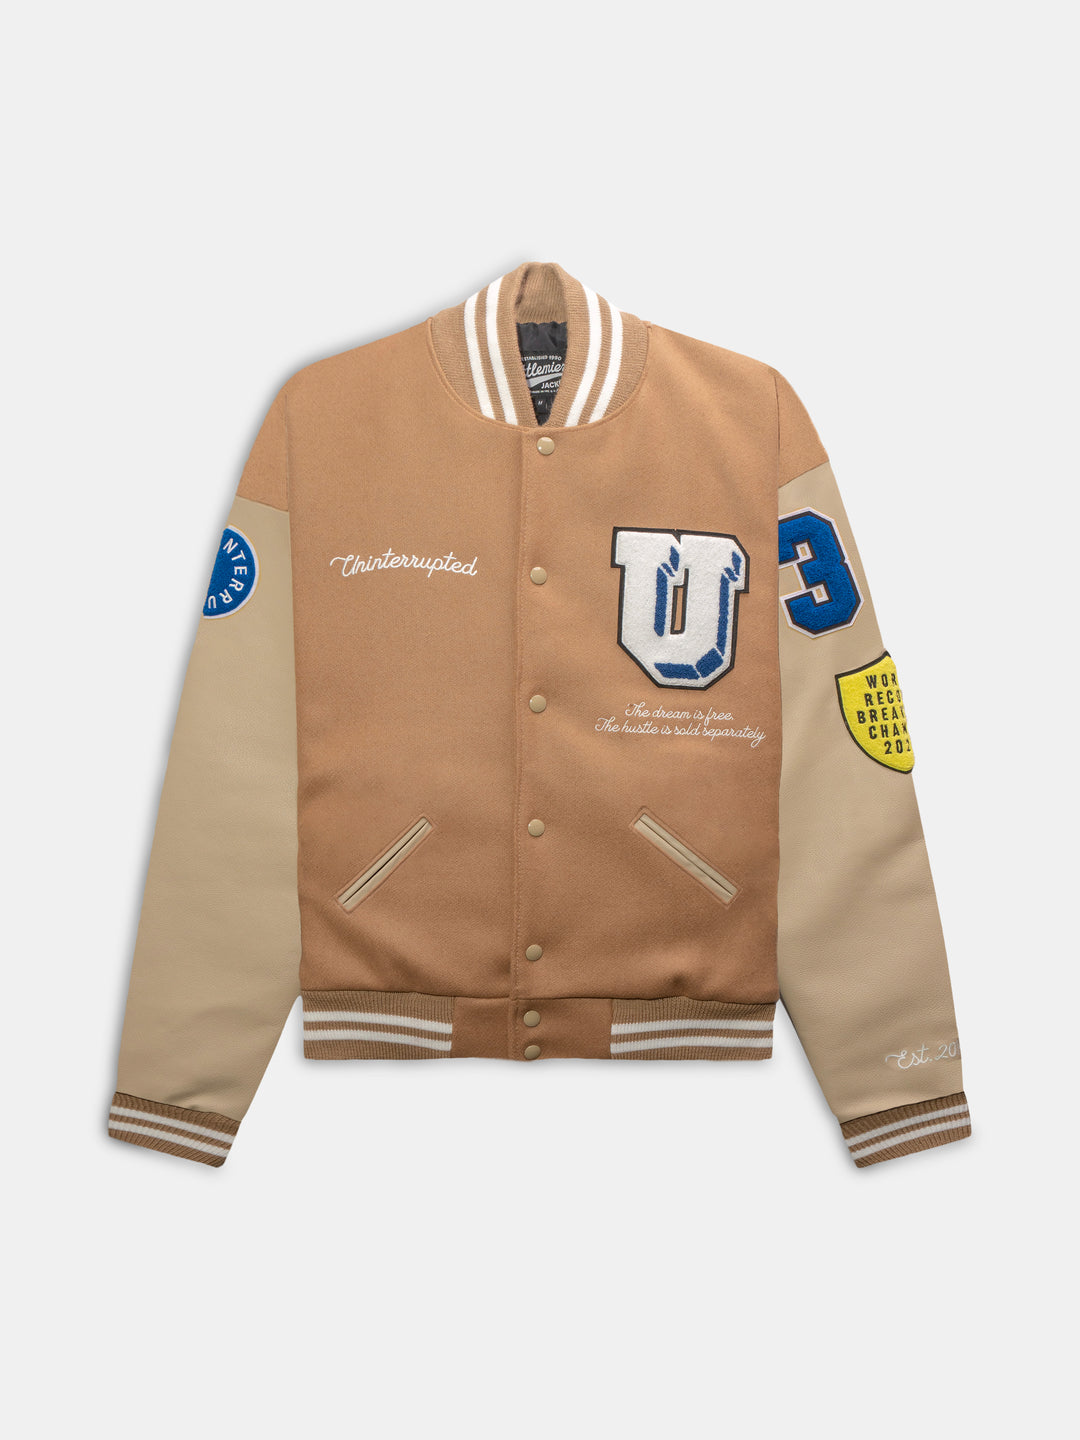 front view of the varsity jacket with several patches and leather sleeves